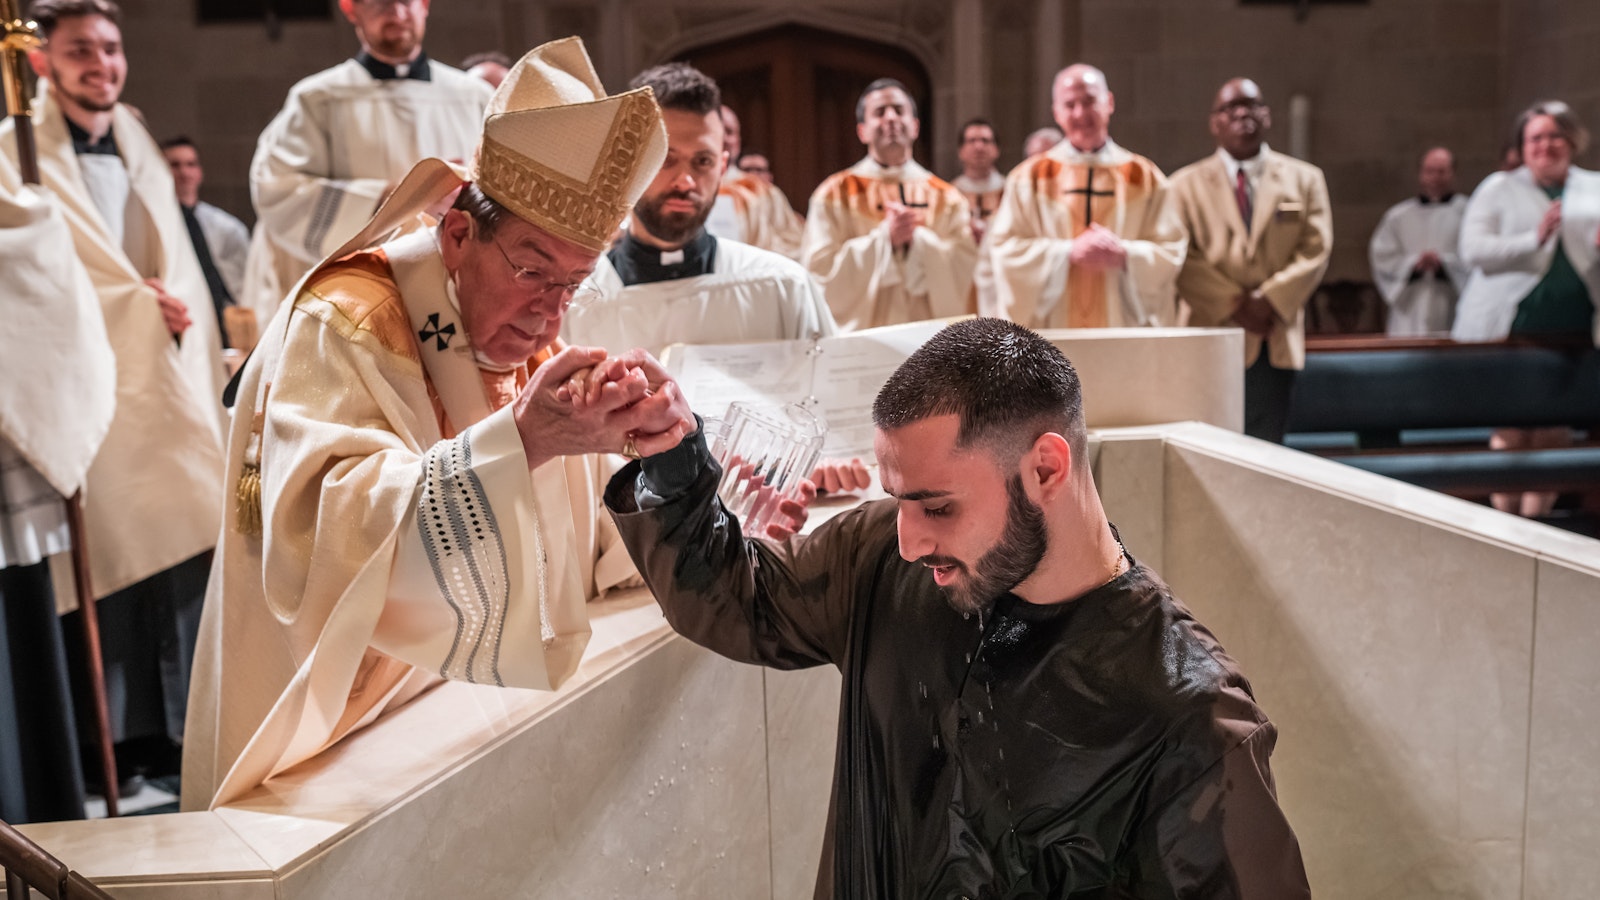 Archbishop Vigneron helps a catechumen out of the baptismal waters after baptizing him during the Easter Vigil on April 8, 2023, at the Cathedral of the Most Blessed Sacrament. (Valaurian Waller | Detroit Catholic)